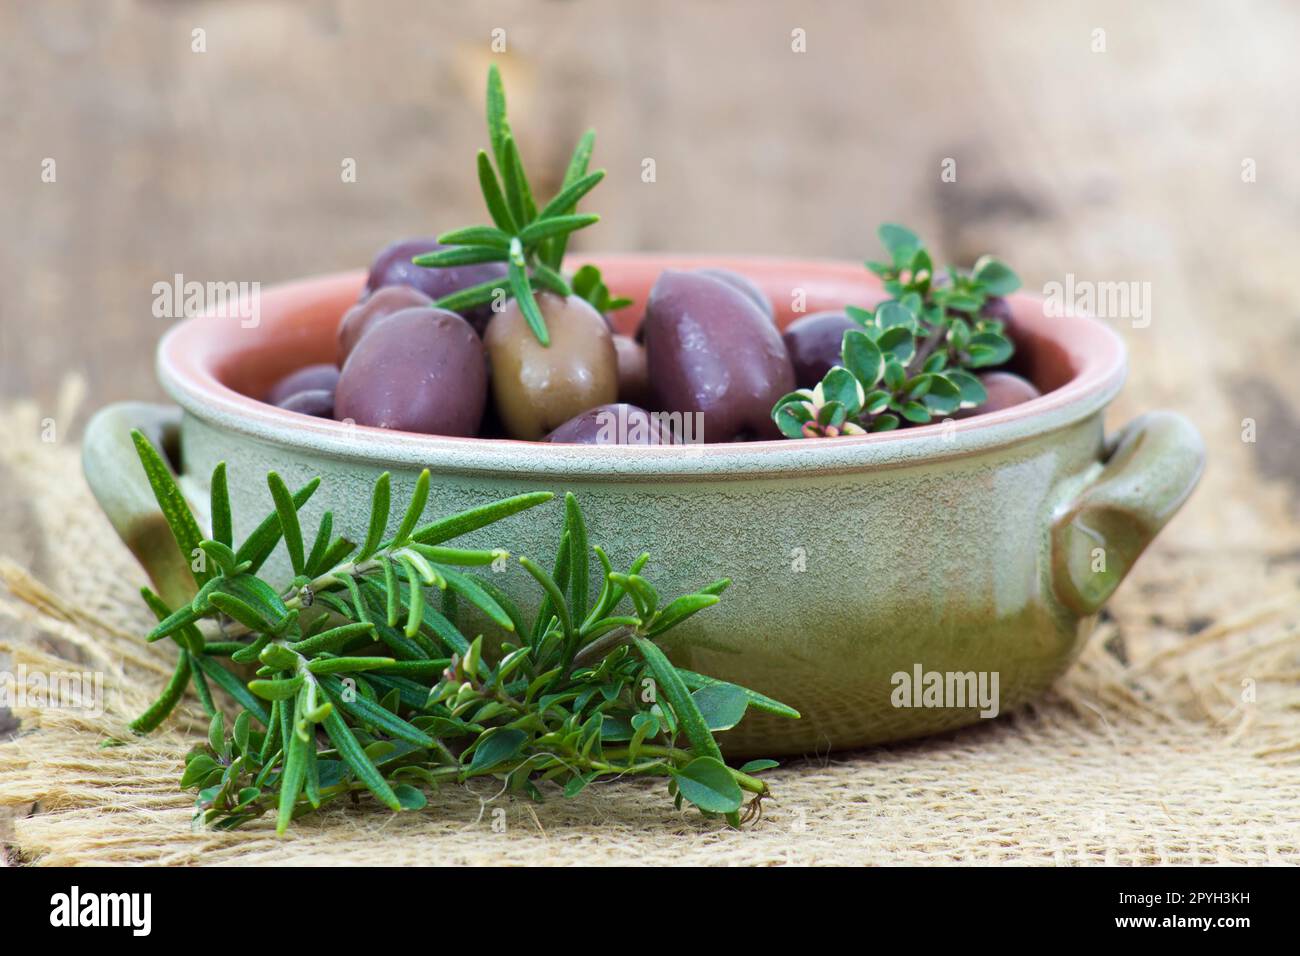 red kalamata olives and herbs in a bowl on wooden background Stock Photo